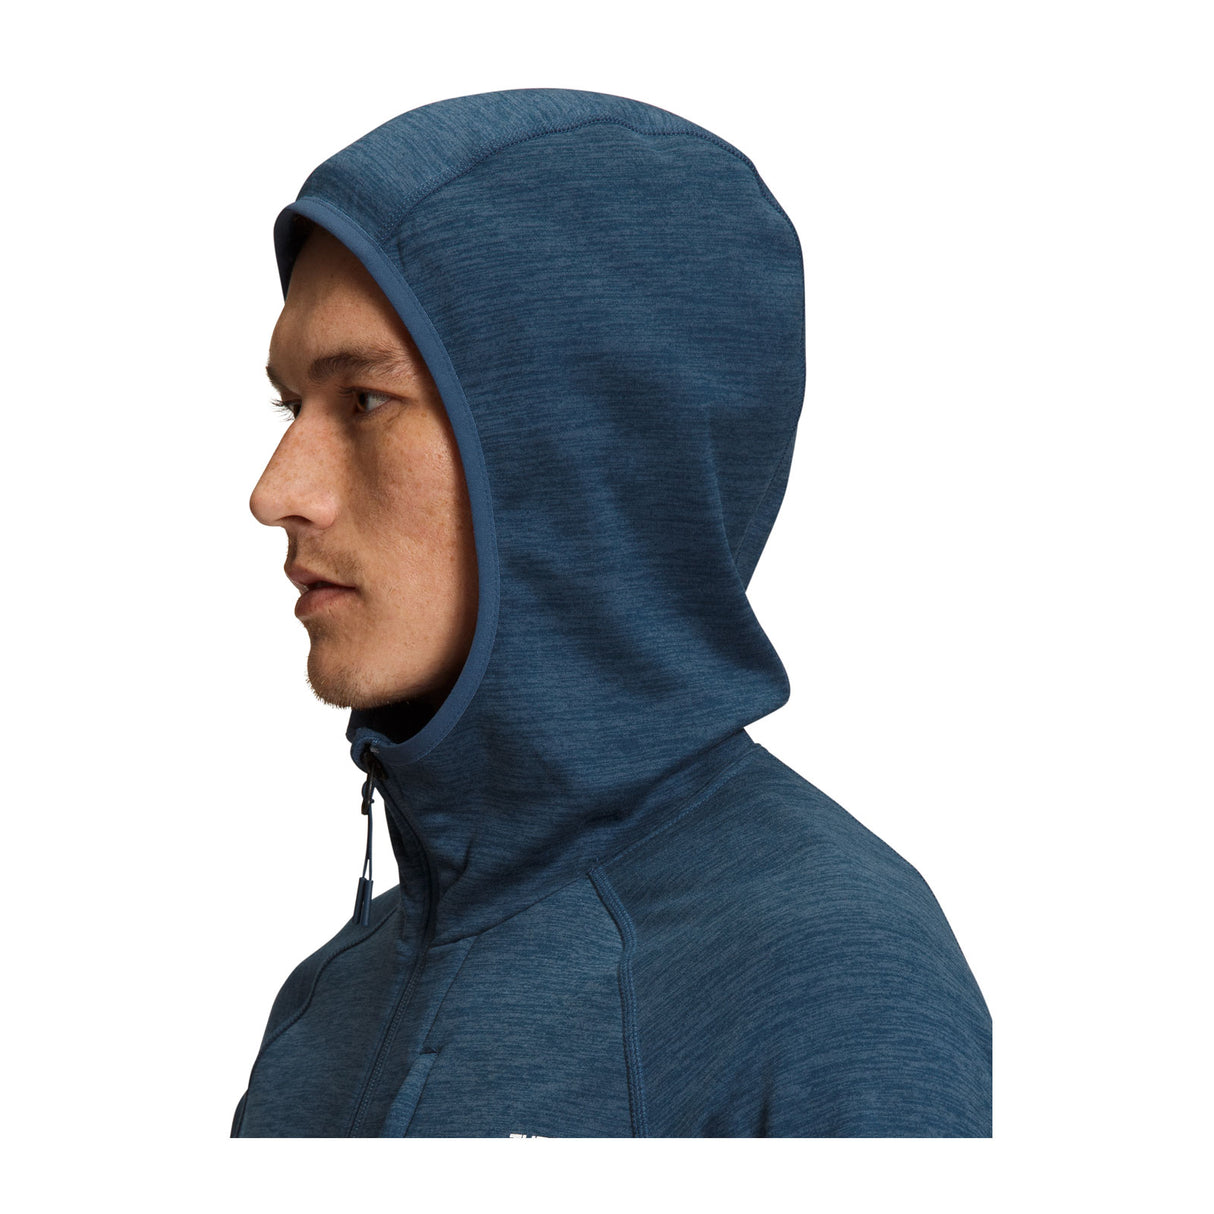 The North Face Canyonlands Hoodie (Men) - Shady Blue Heather Apparel - Jacket - Lightweight - The Heel Shoe Fitters